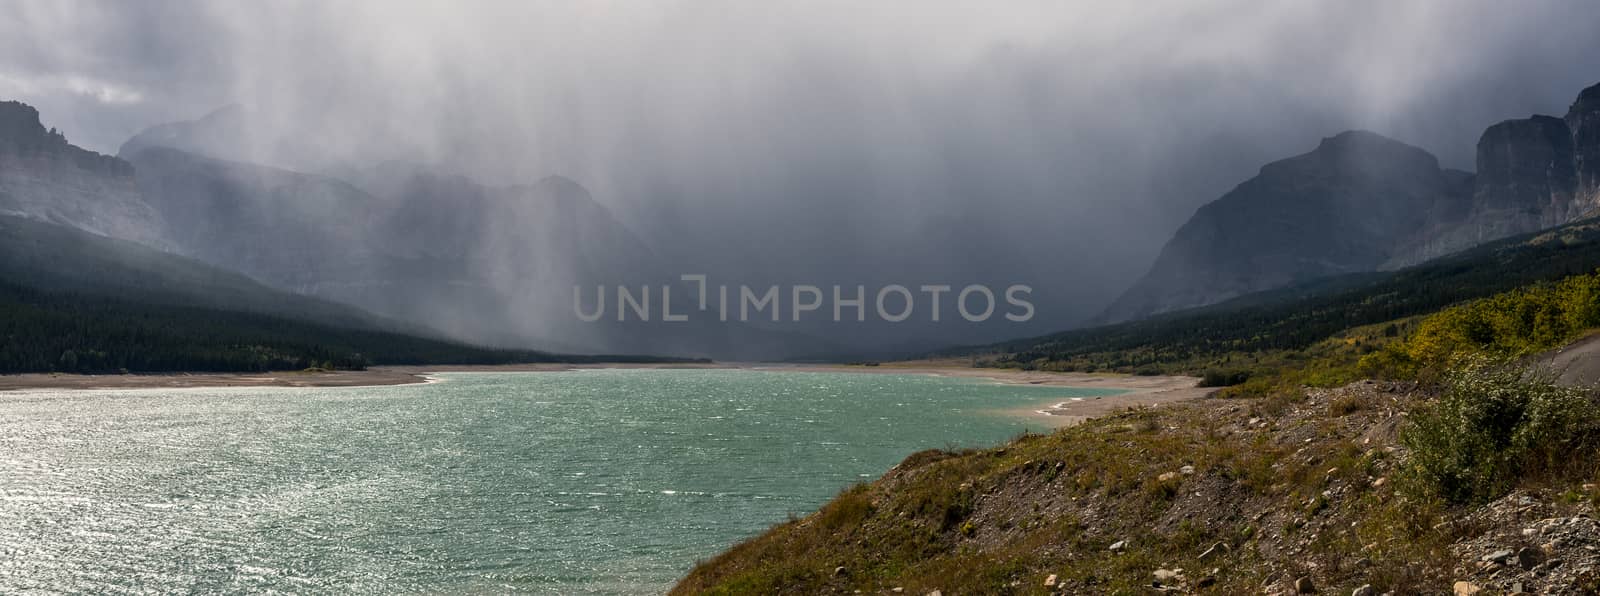 Storm clouds gathering over Lake Sherburne by phil_bird